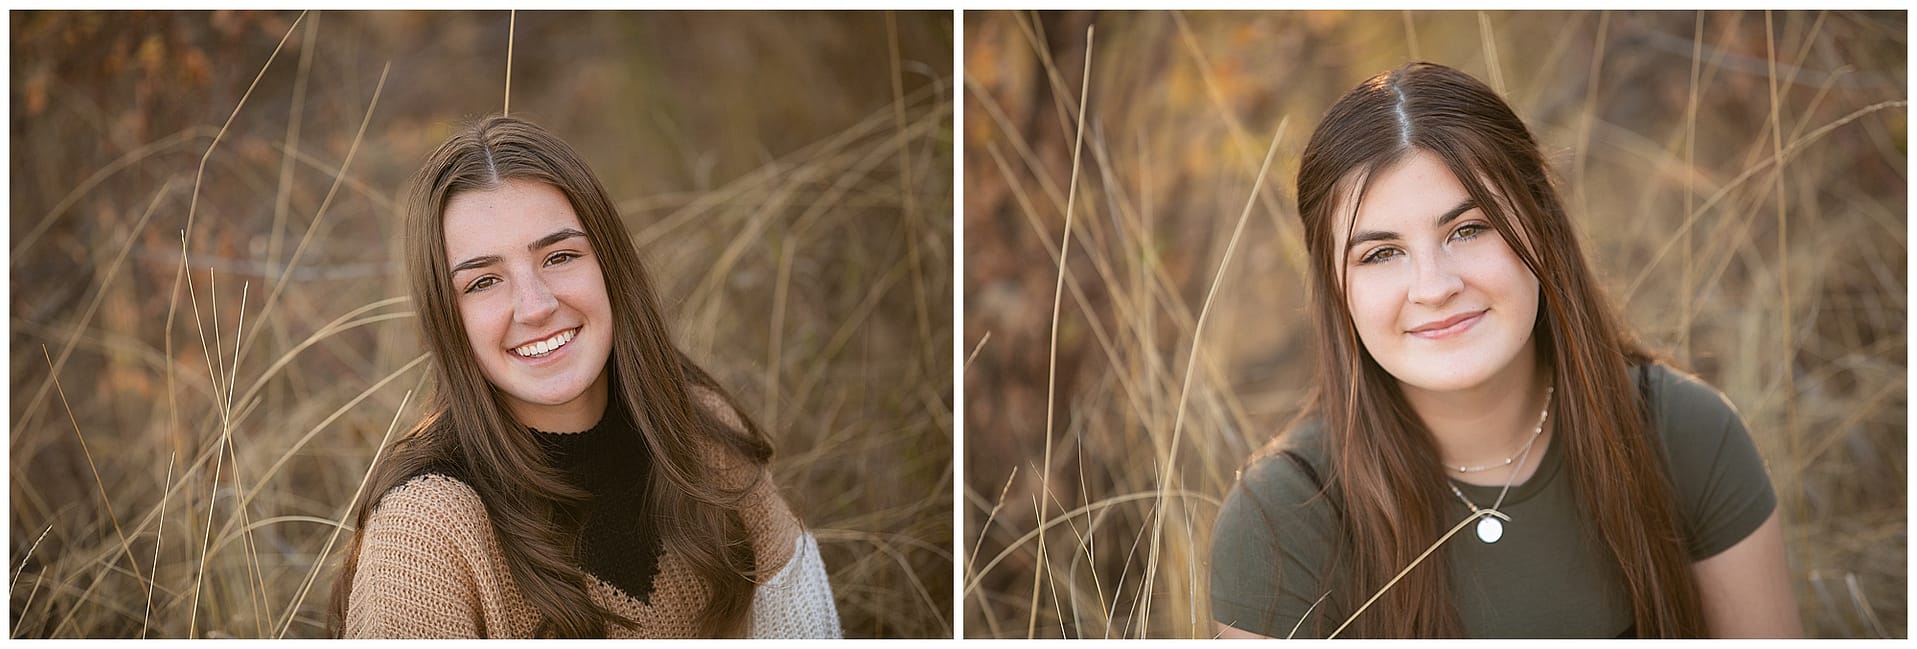 Portraits in open space of Boise,ID. Photos by Tiffany Hix Photography.